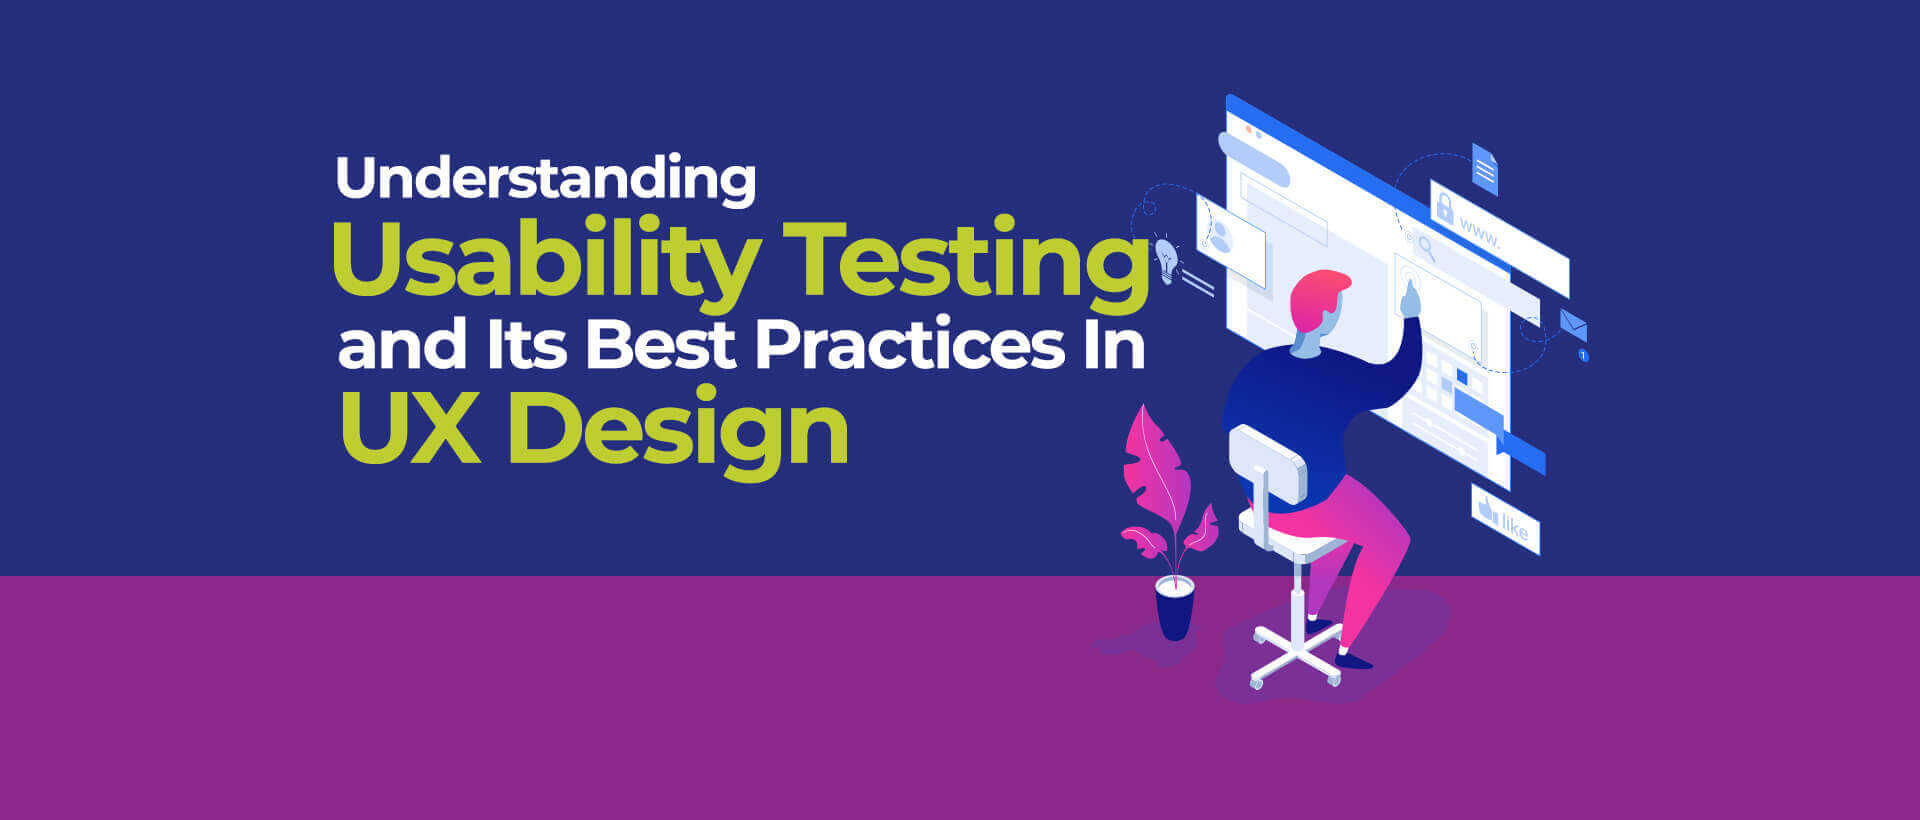 Understanding Usability Testing and Its Best Practices In UX Design